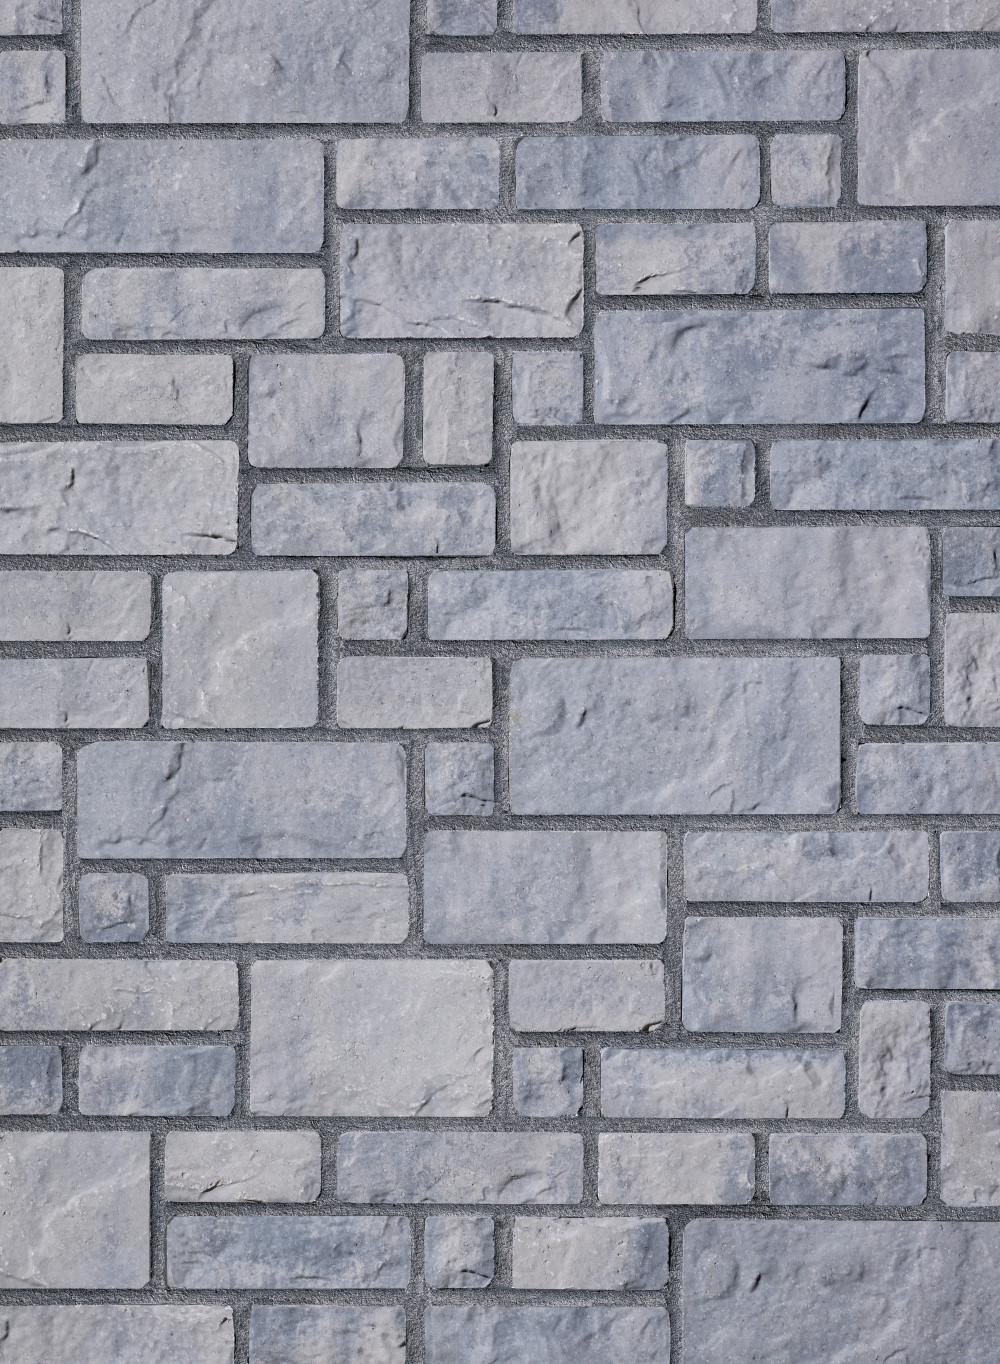 Image Suretouch Stone Morency collection - Range Newport Grey